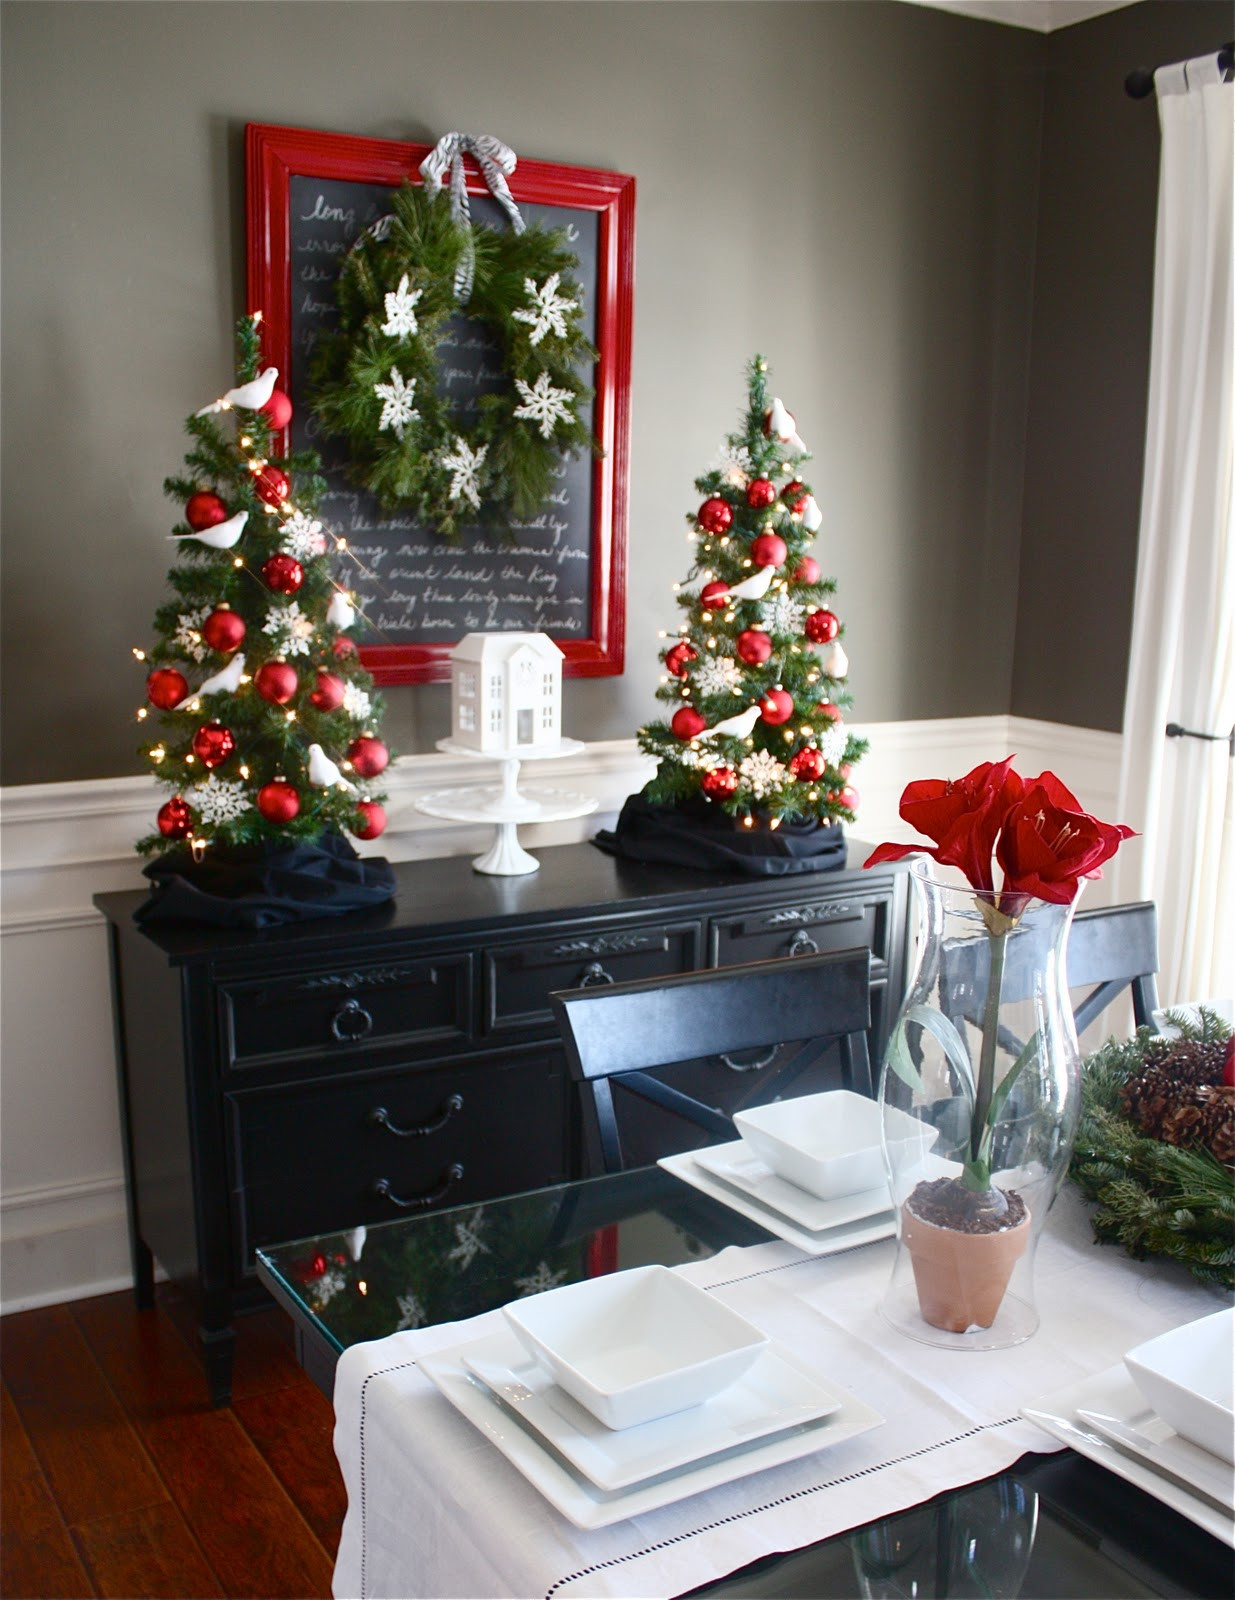 Dining Room Christmas Decorations
 The Yellow Cape Cod Holiday Home Series Christmas Dining